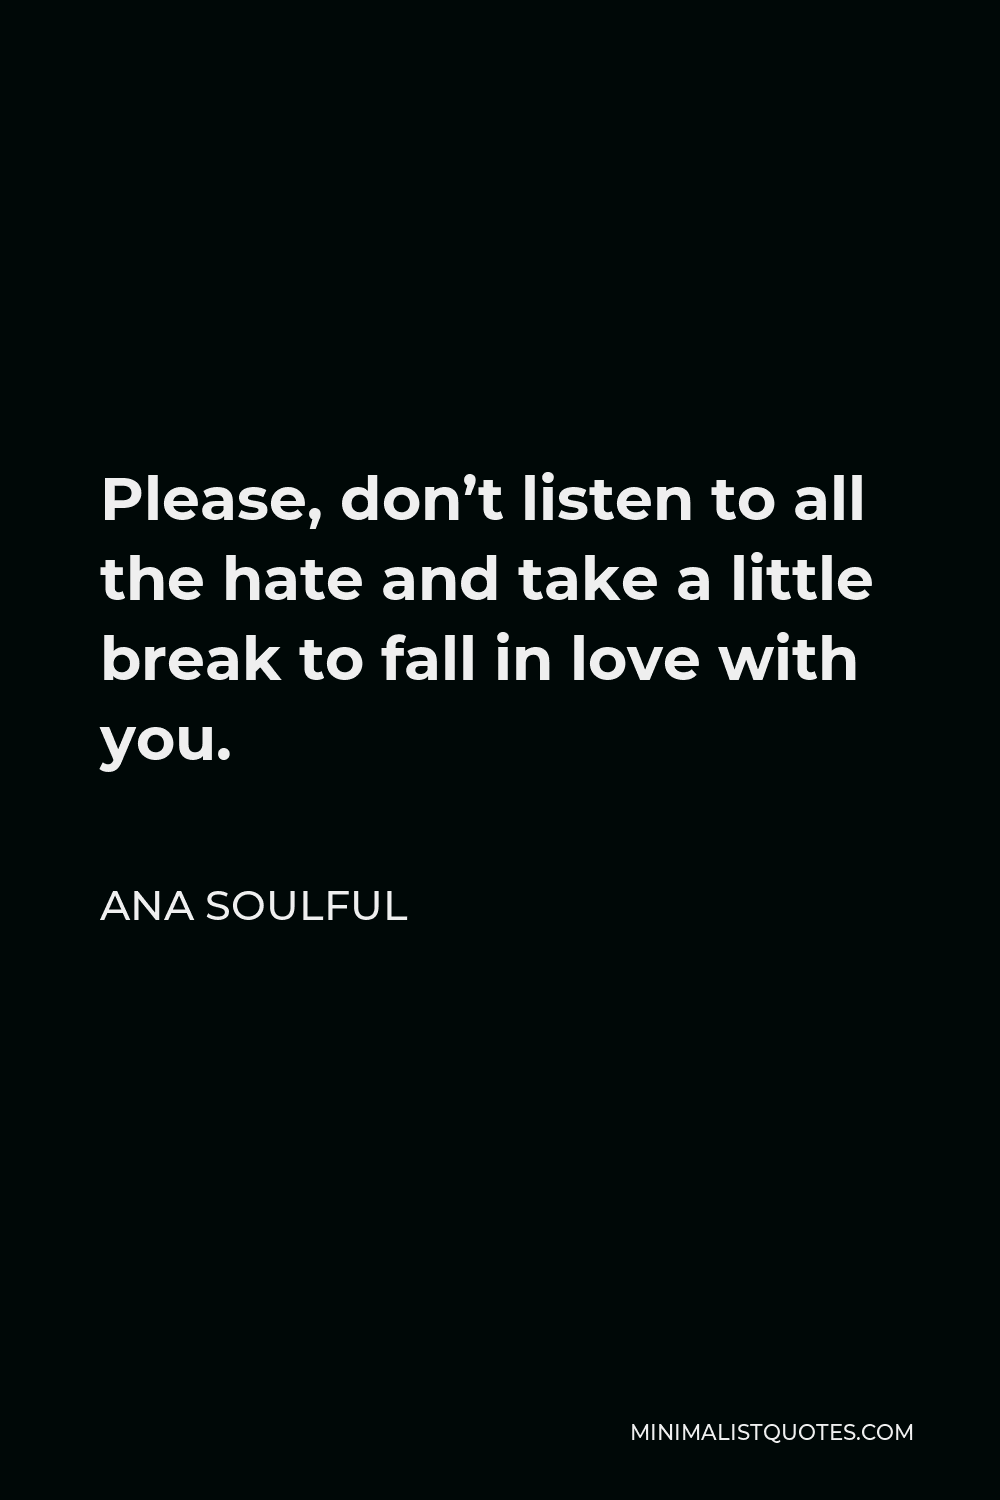 Ana Soulful Quote - Please, don’t listen to all the hate and take a little break to fall in love with you.